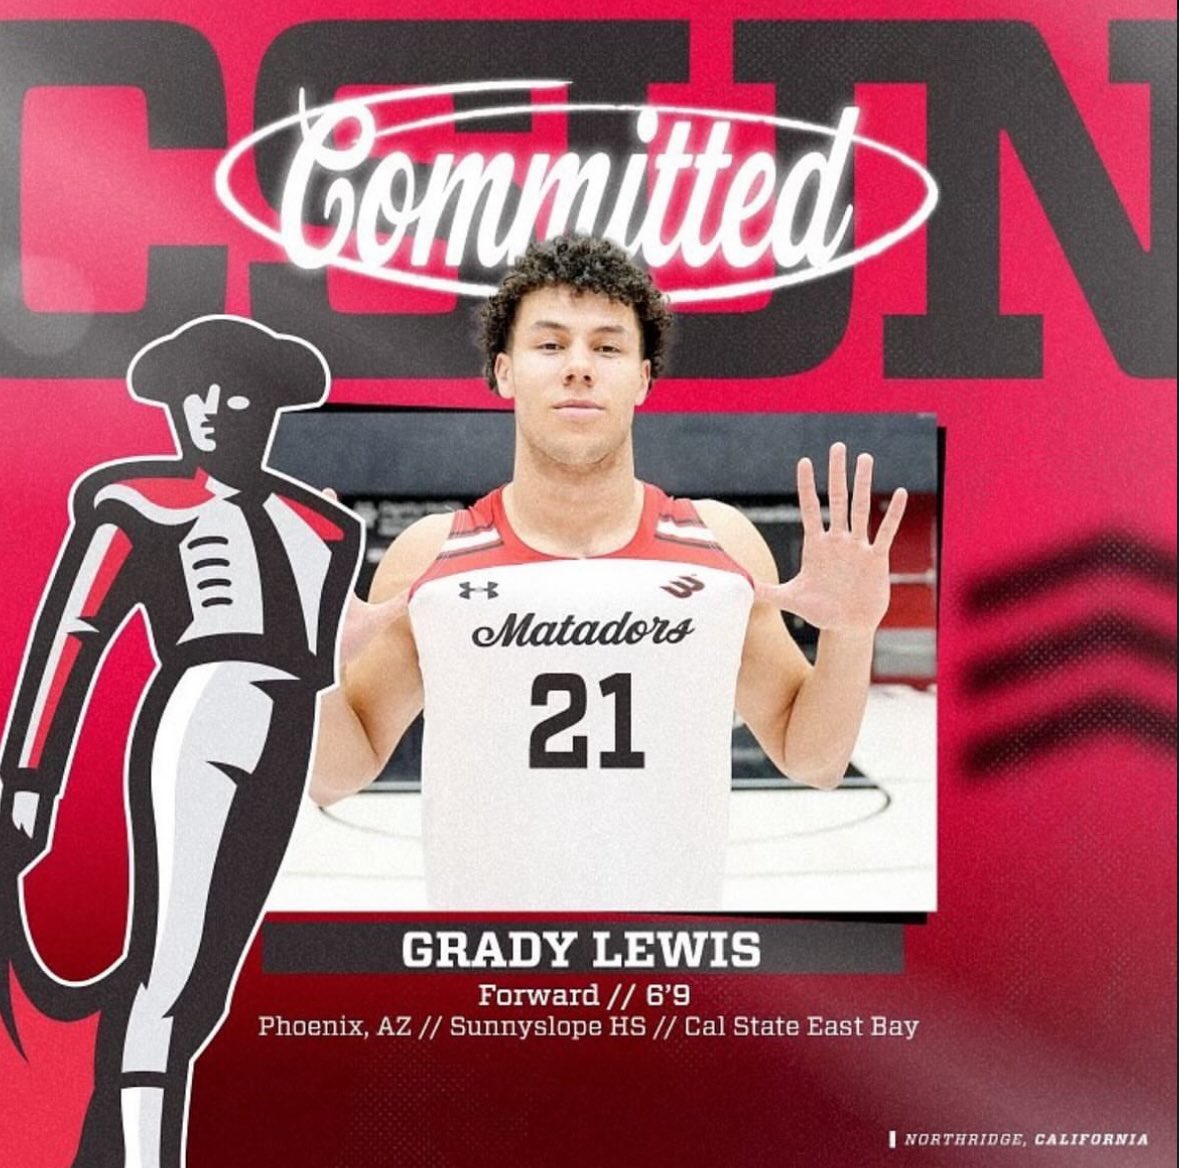 Sophomore transfer Grady Lewis has committed to CSUN❗️❗️ He is a 6’9 forward that 14.7 points, 7.4 rebounds, and 1 block per game for Cal State East Bay this season. Keep your eyes on Grady 👀 @grady_lewi1 @CSUNMBB